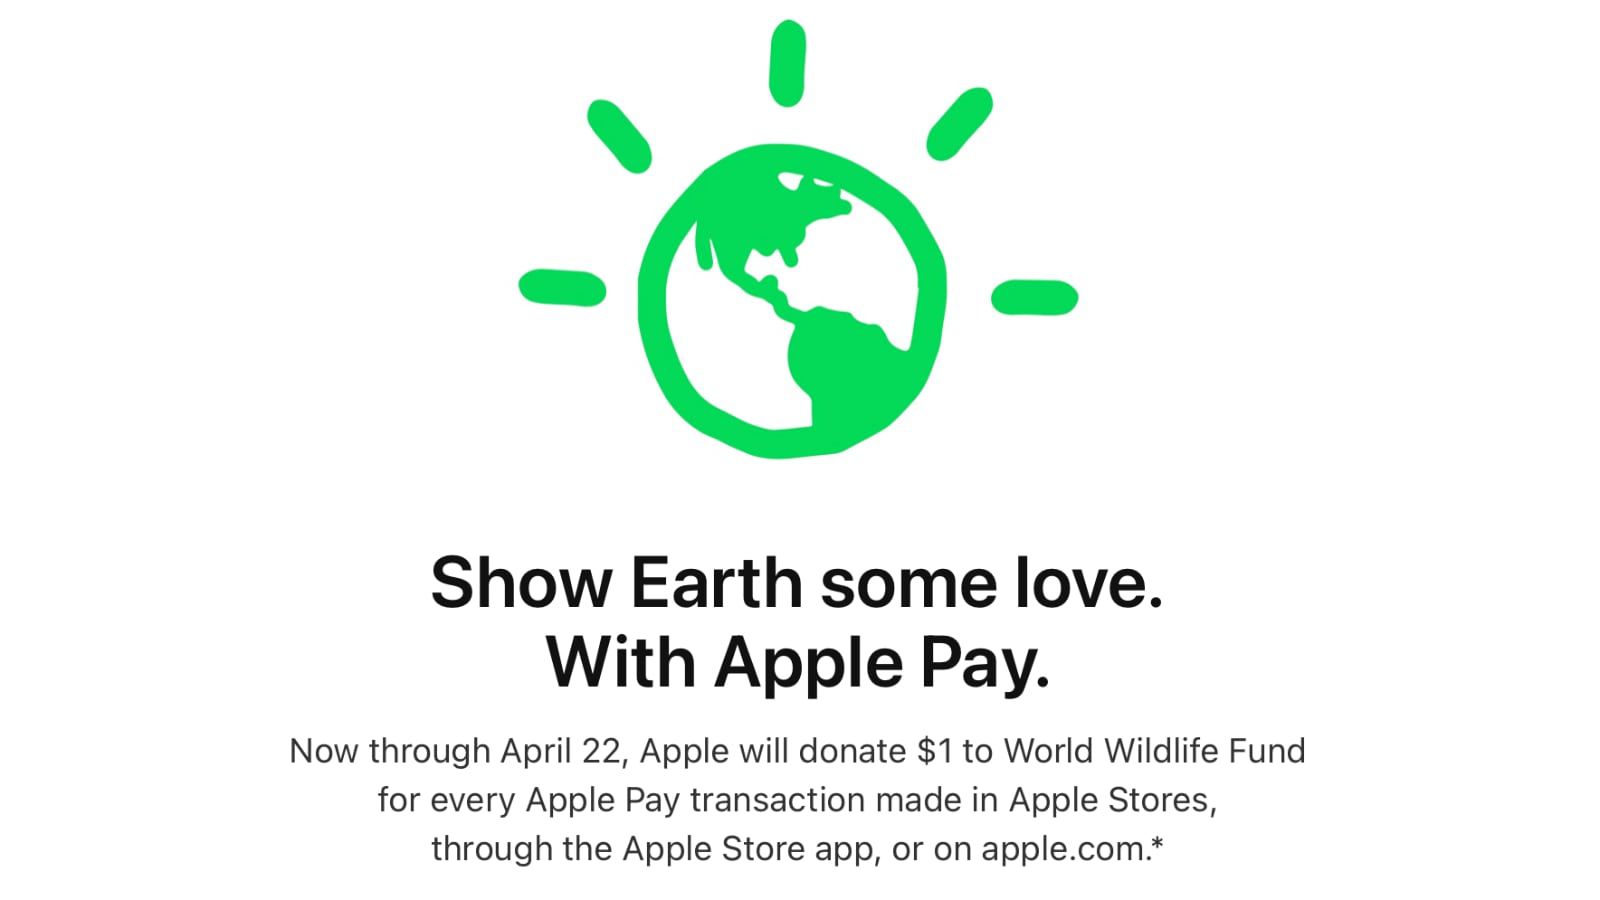 Apple Celebrating Earth Day With 1 Donation for Every Apple Store